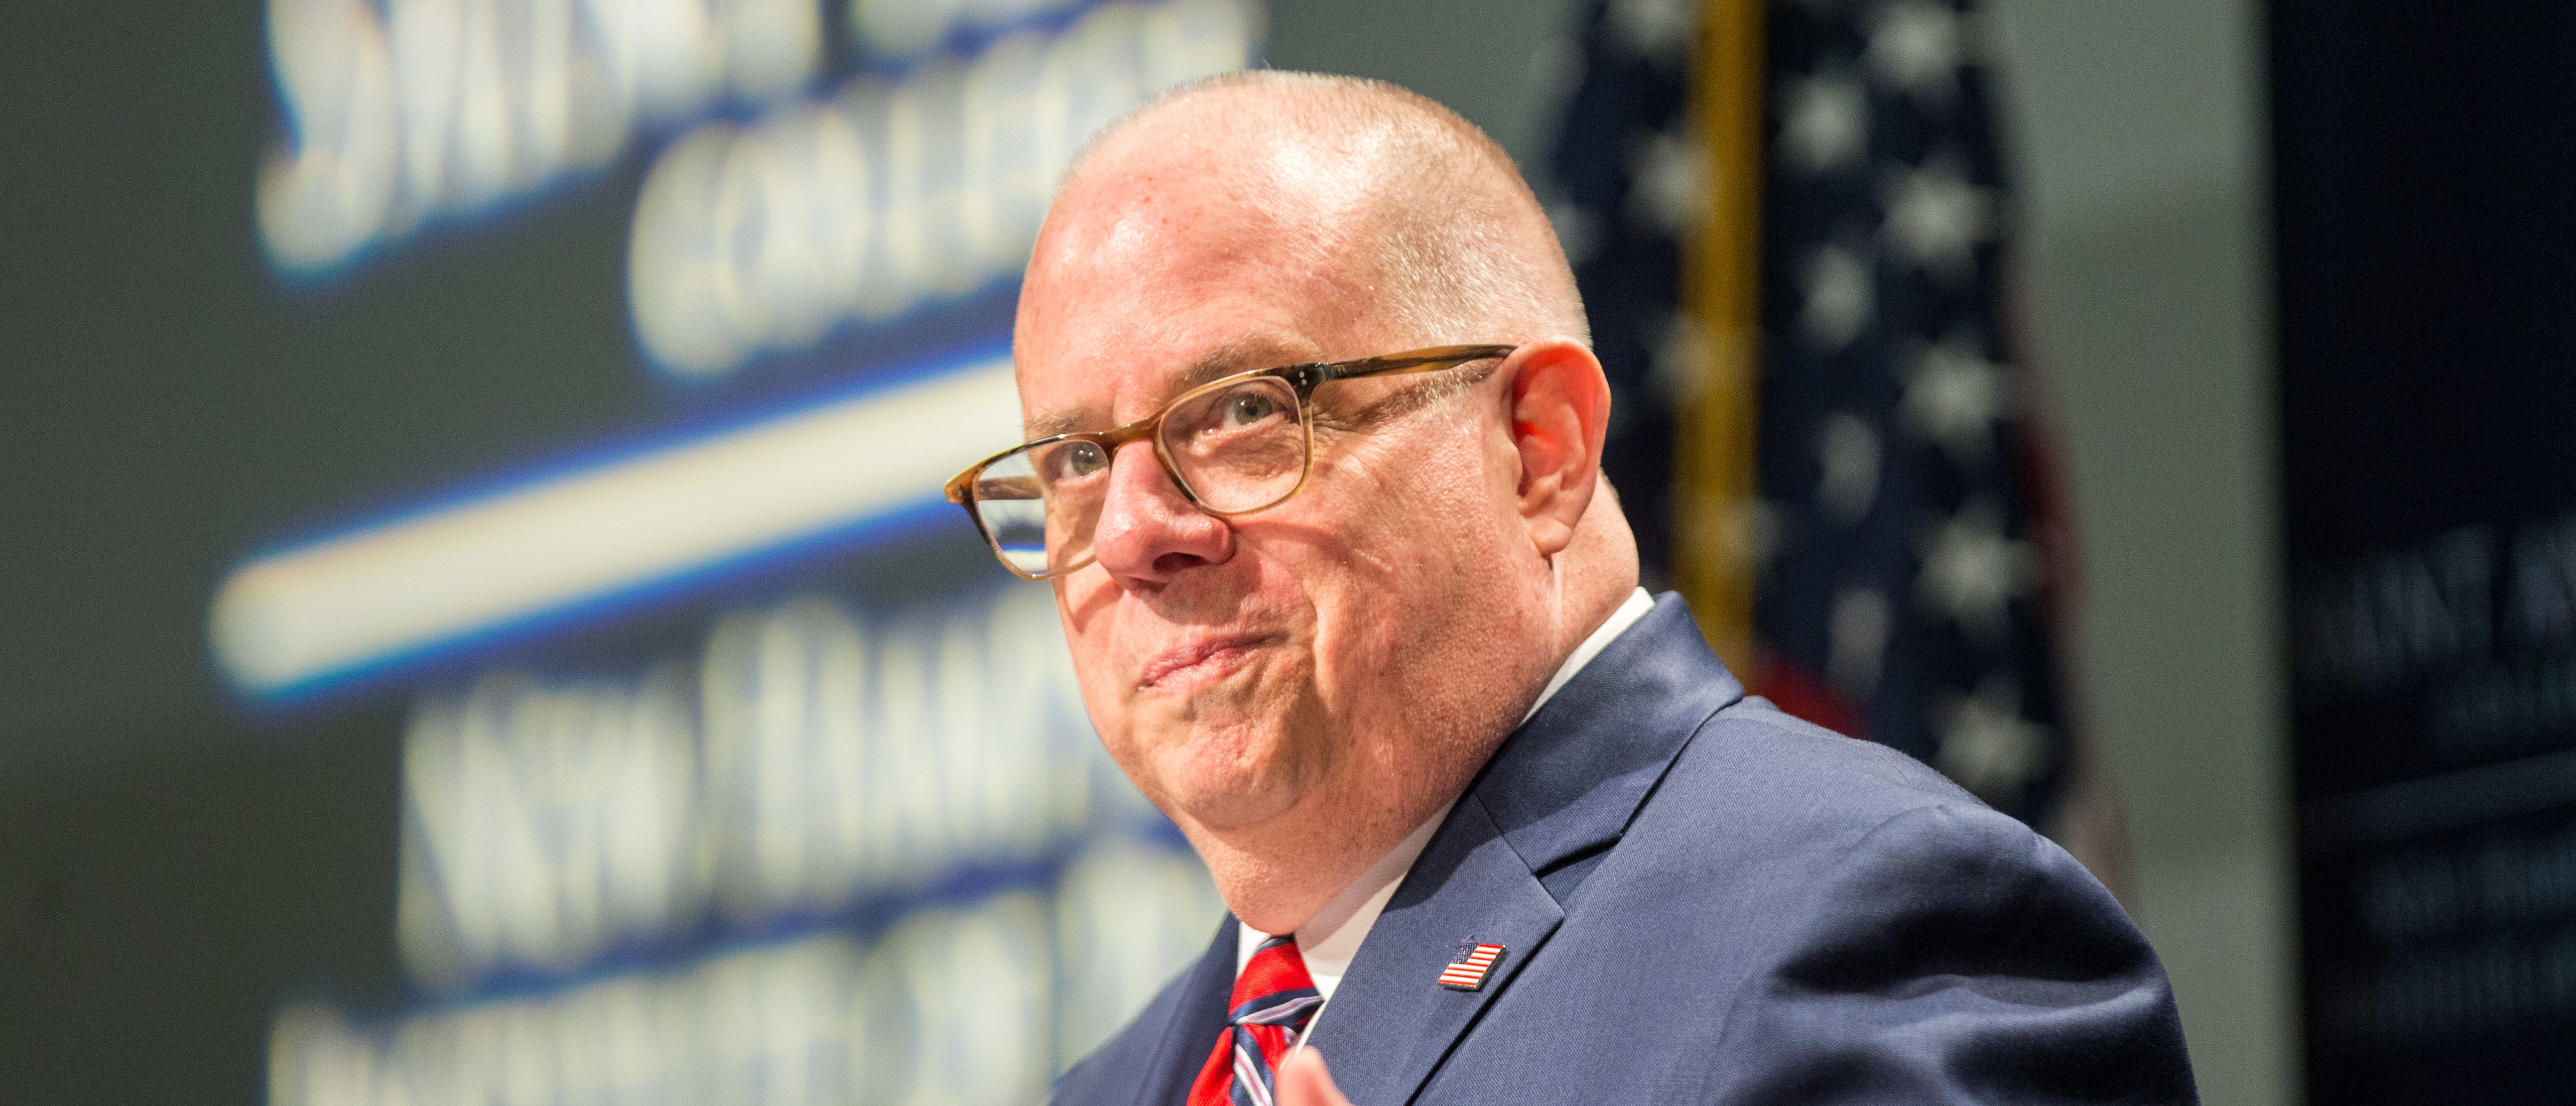 MANCHESTER, NH - APRIL 23: Maryland Governor Larry Hogan speaks at the New Hampshire Institute of Politics as he mulls a Presidential run on April 23, 2019 in Manchester, New Hampshire. (Photo by Scott Eisen/Getty Images)